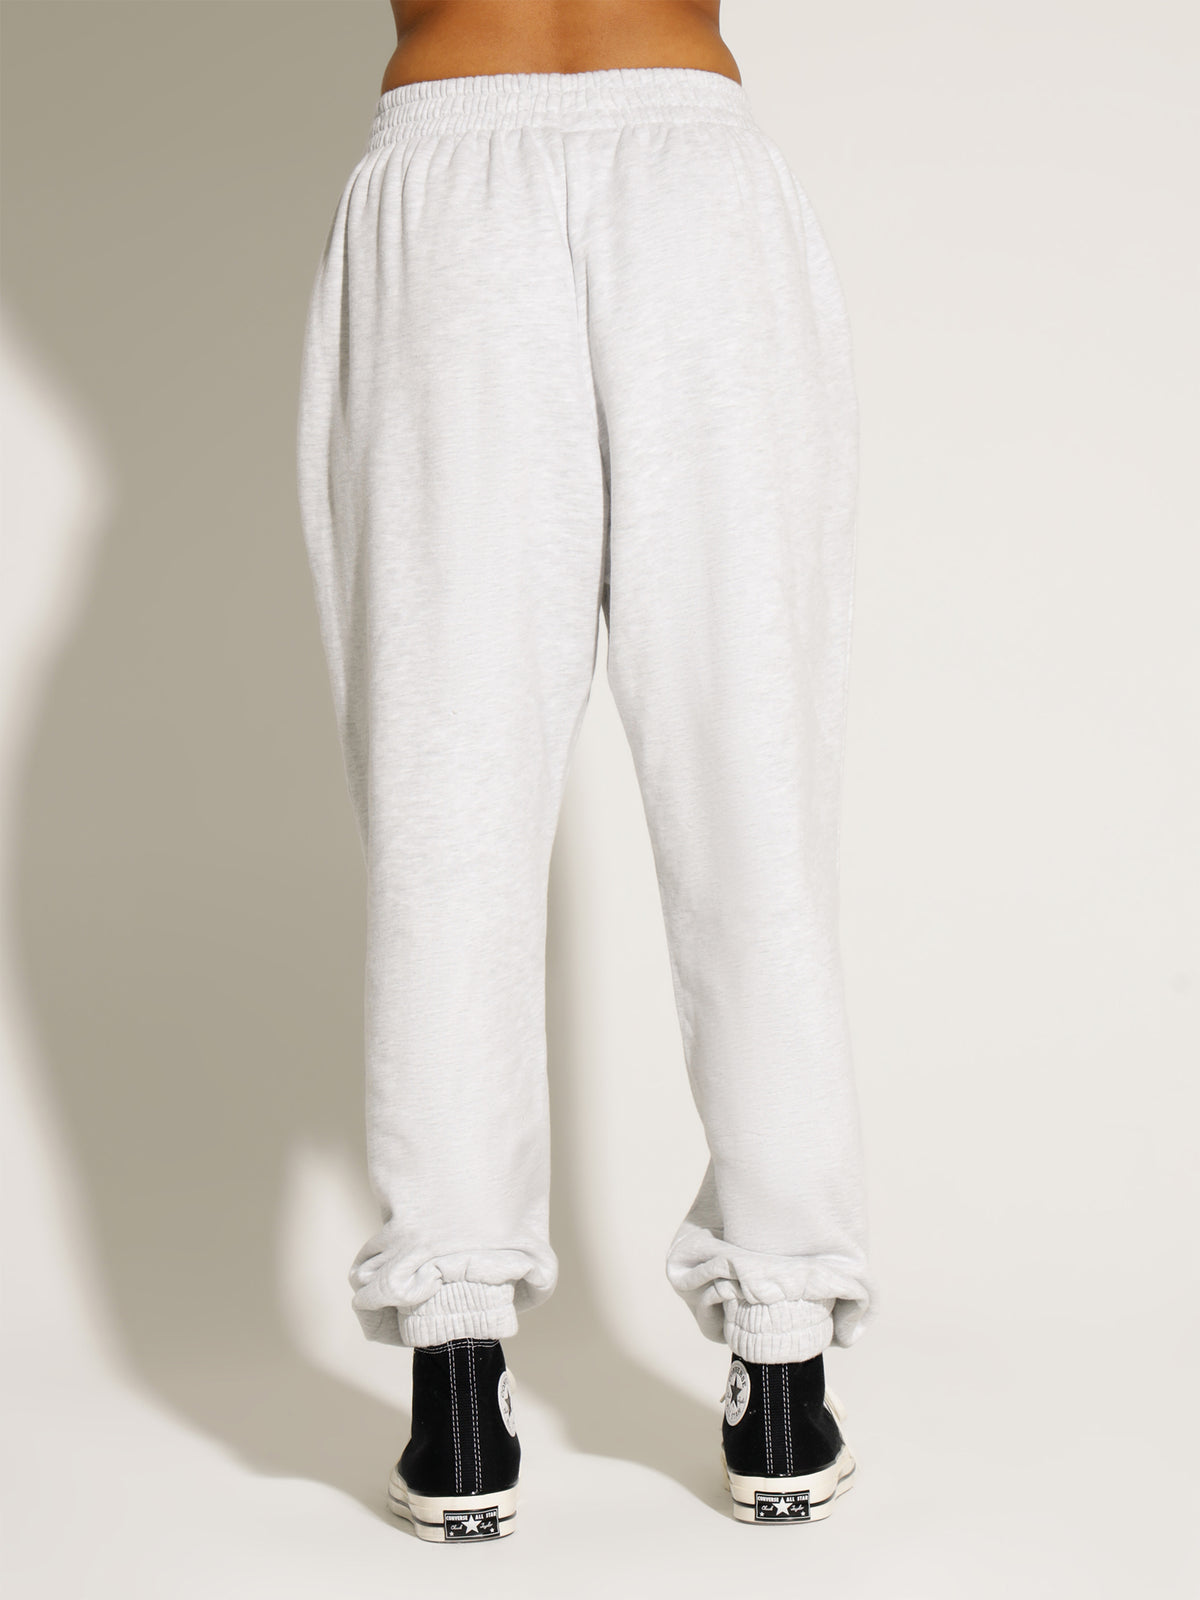 MSE Classic Sweatpants in Grey Marle